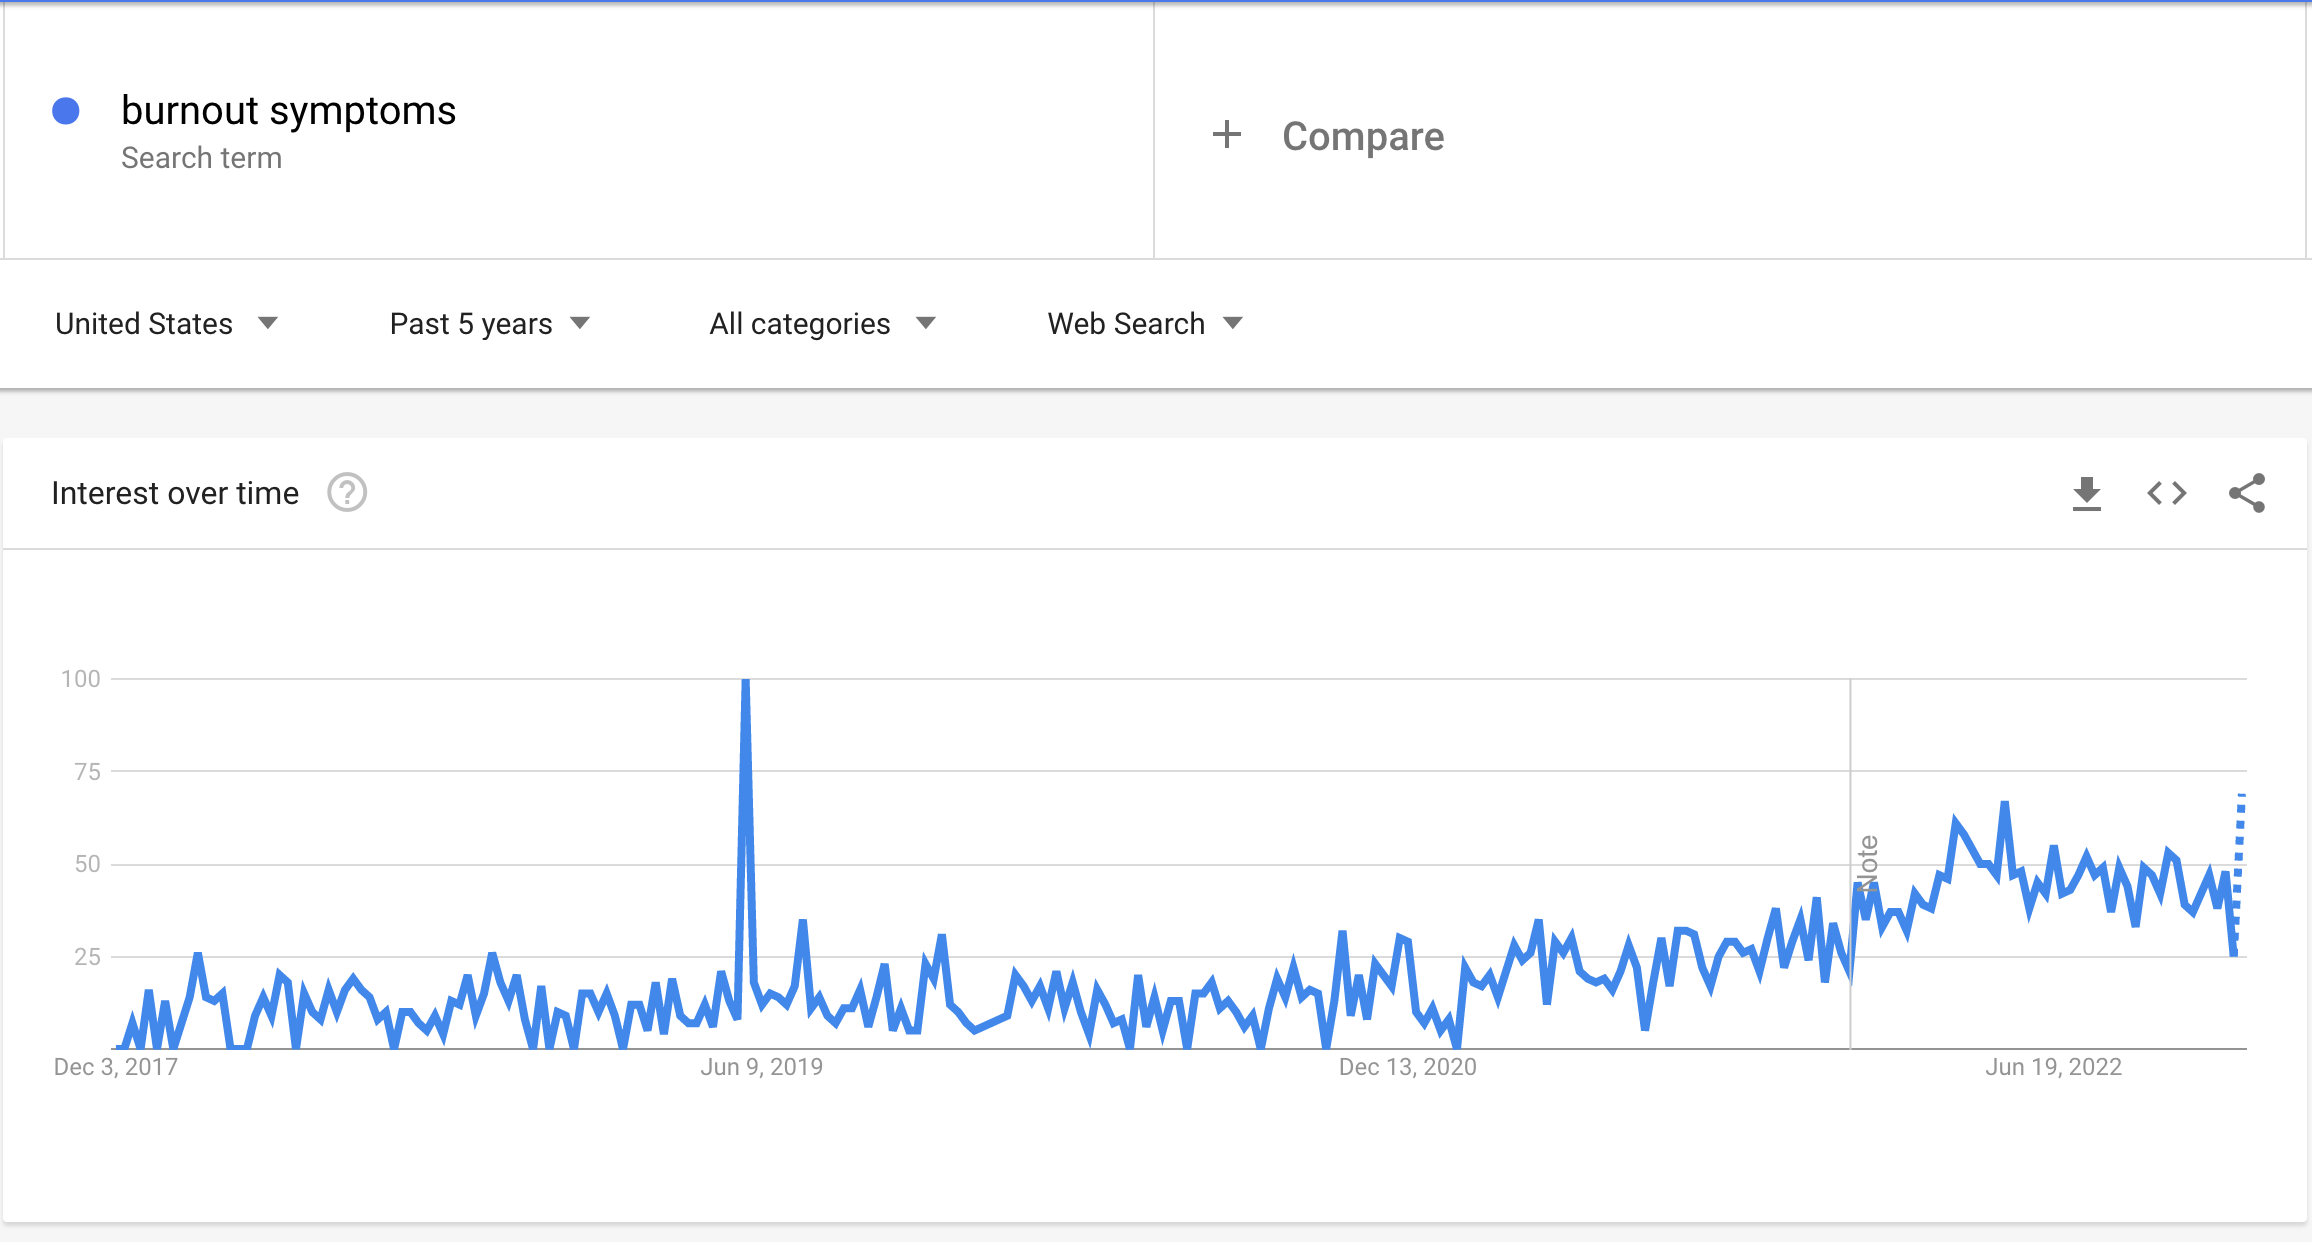 Search volume for keyword “burnout symptoms” from 2017 - 2022.